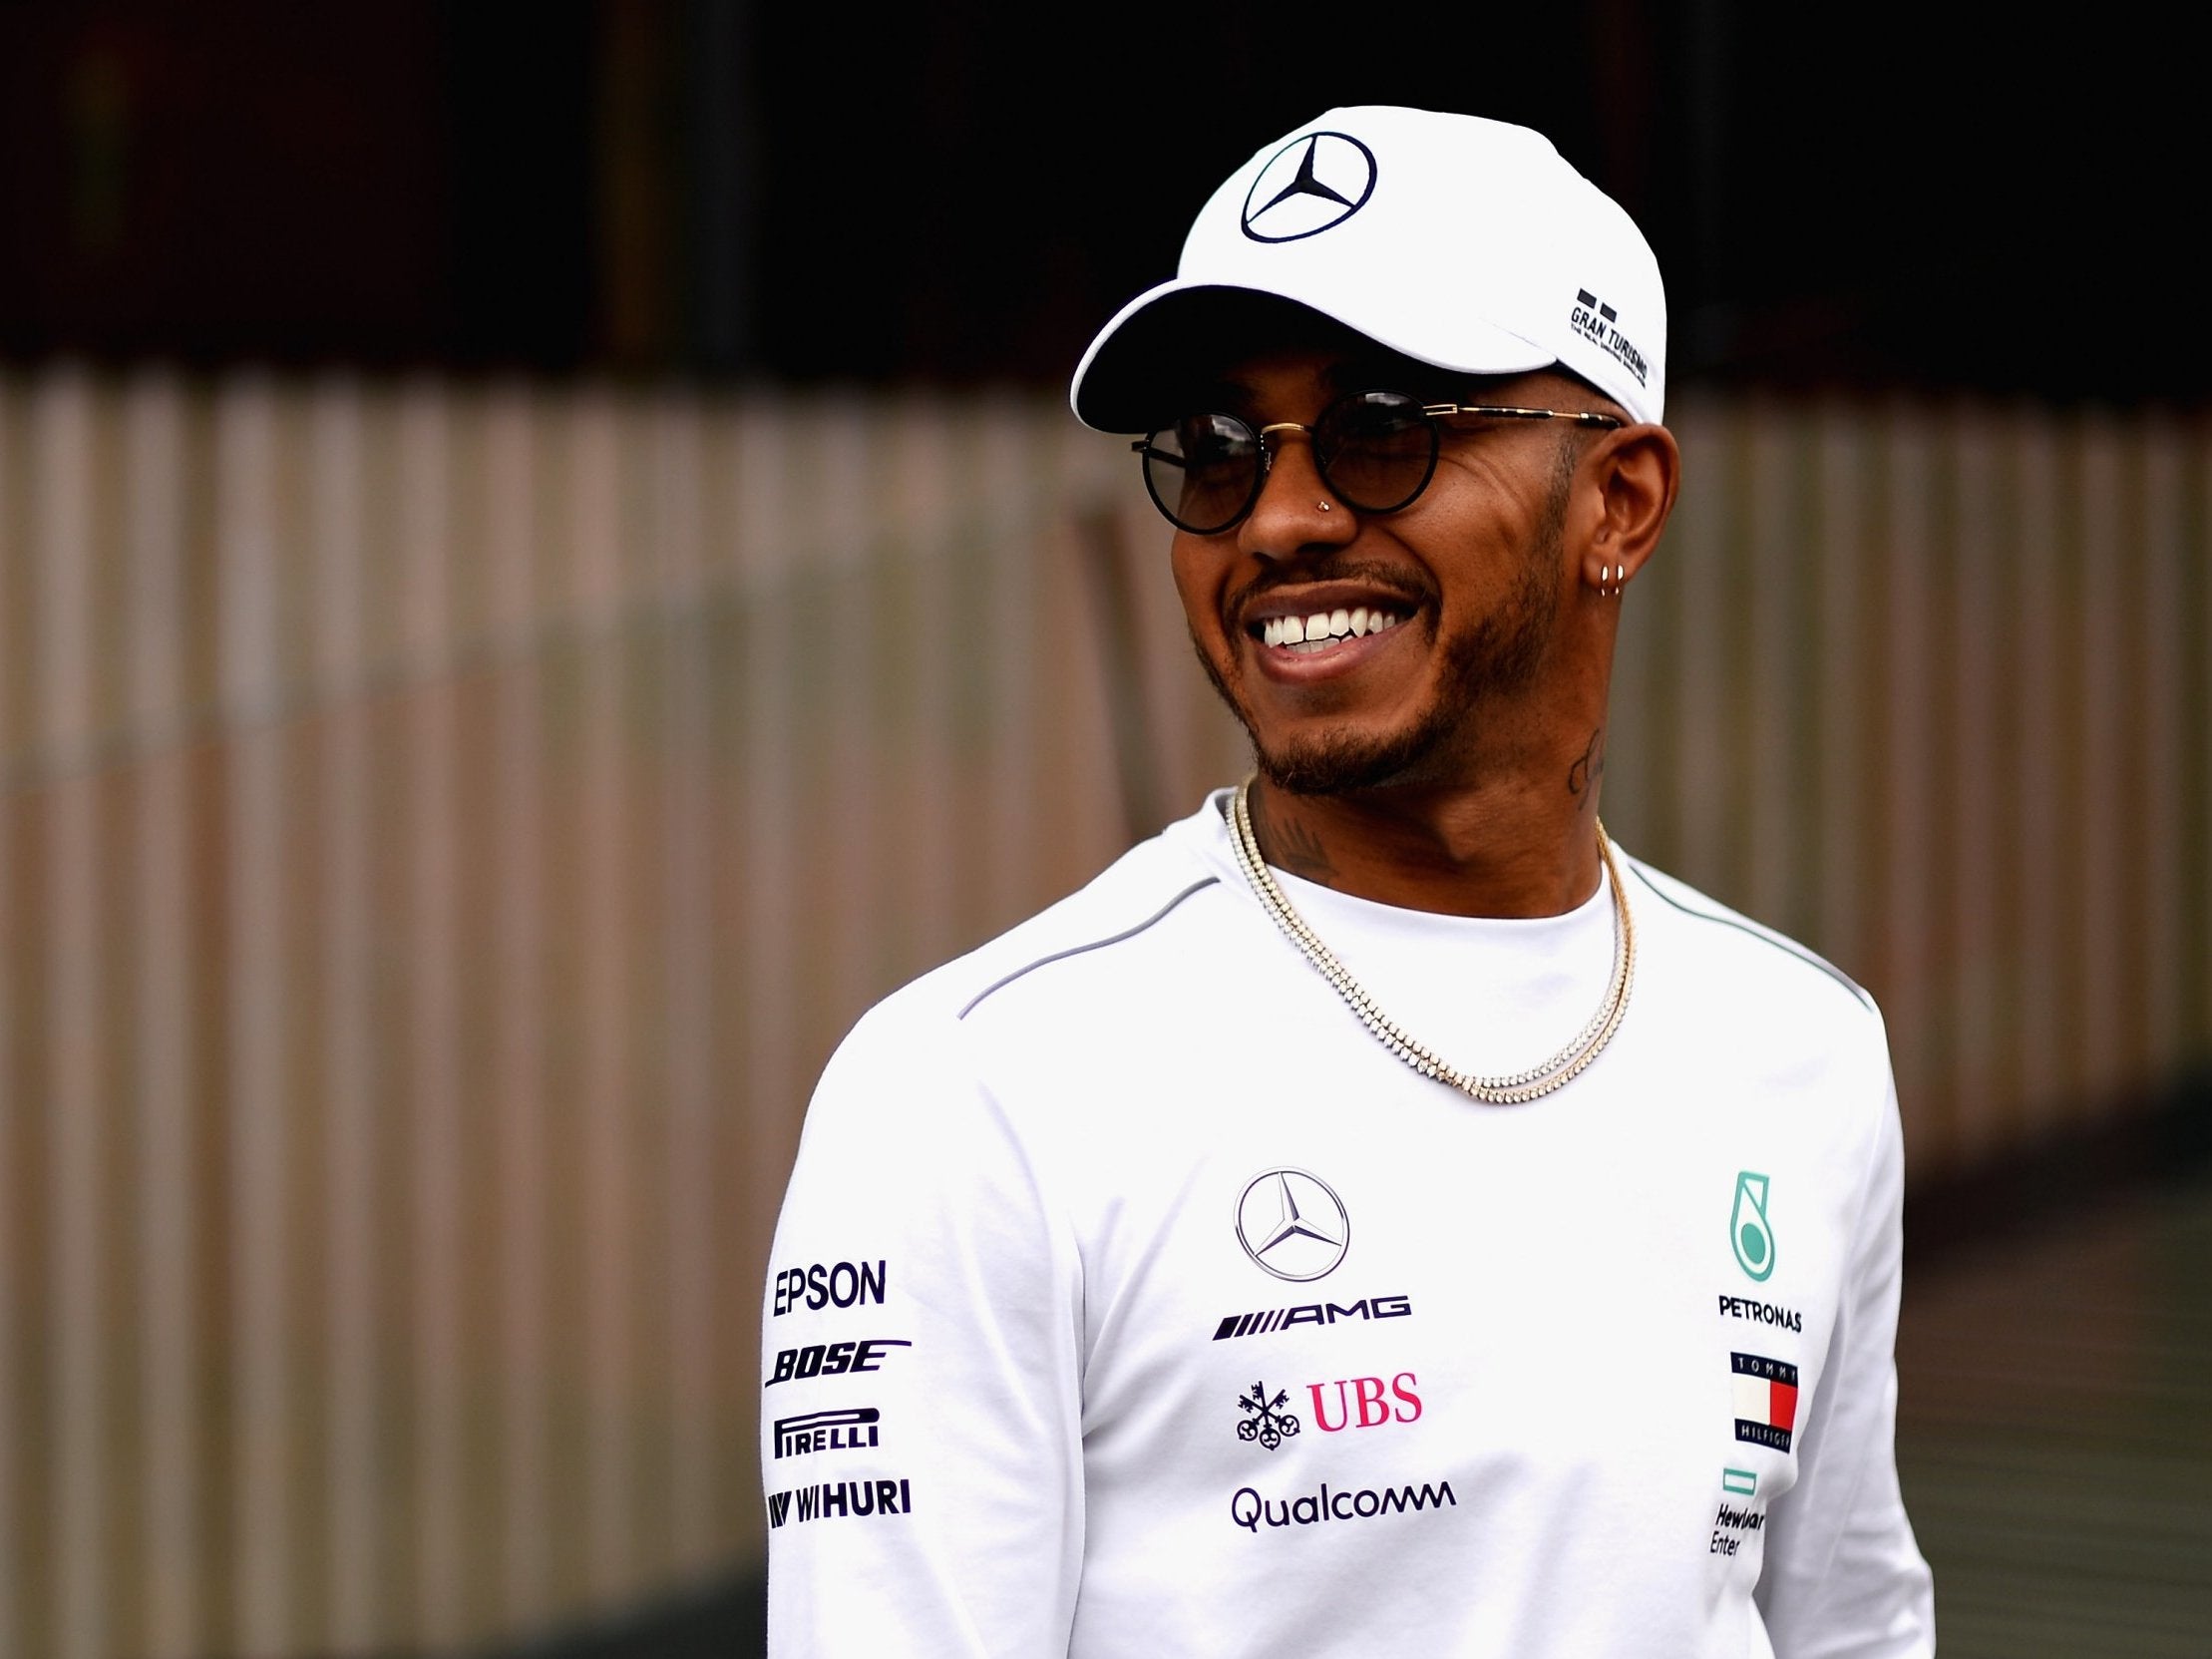 Lewis Hamilton has reflected in detail on his fans, life in F1 and when his time will be up